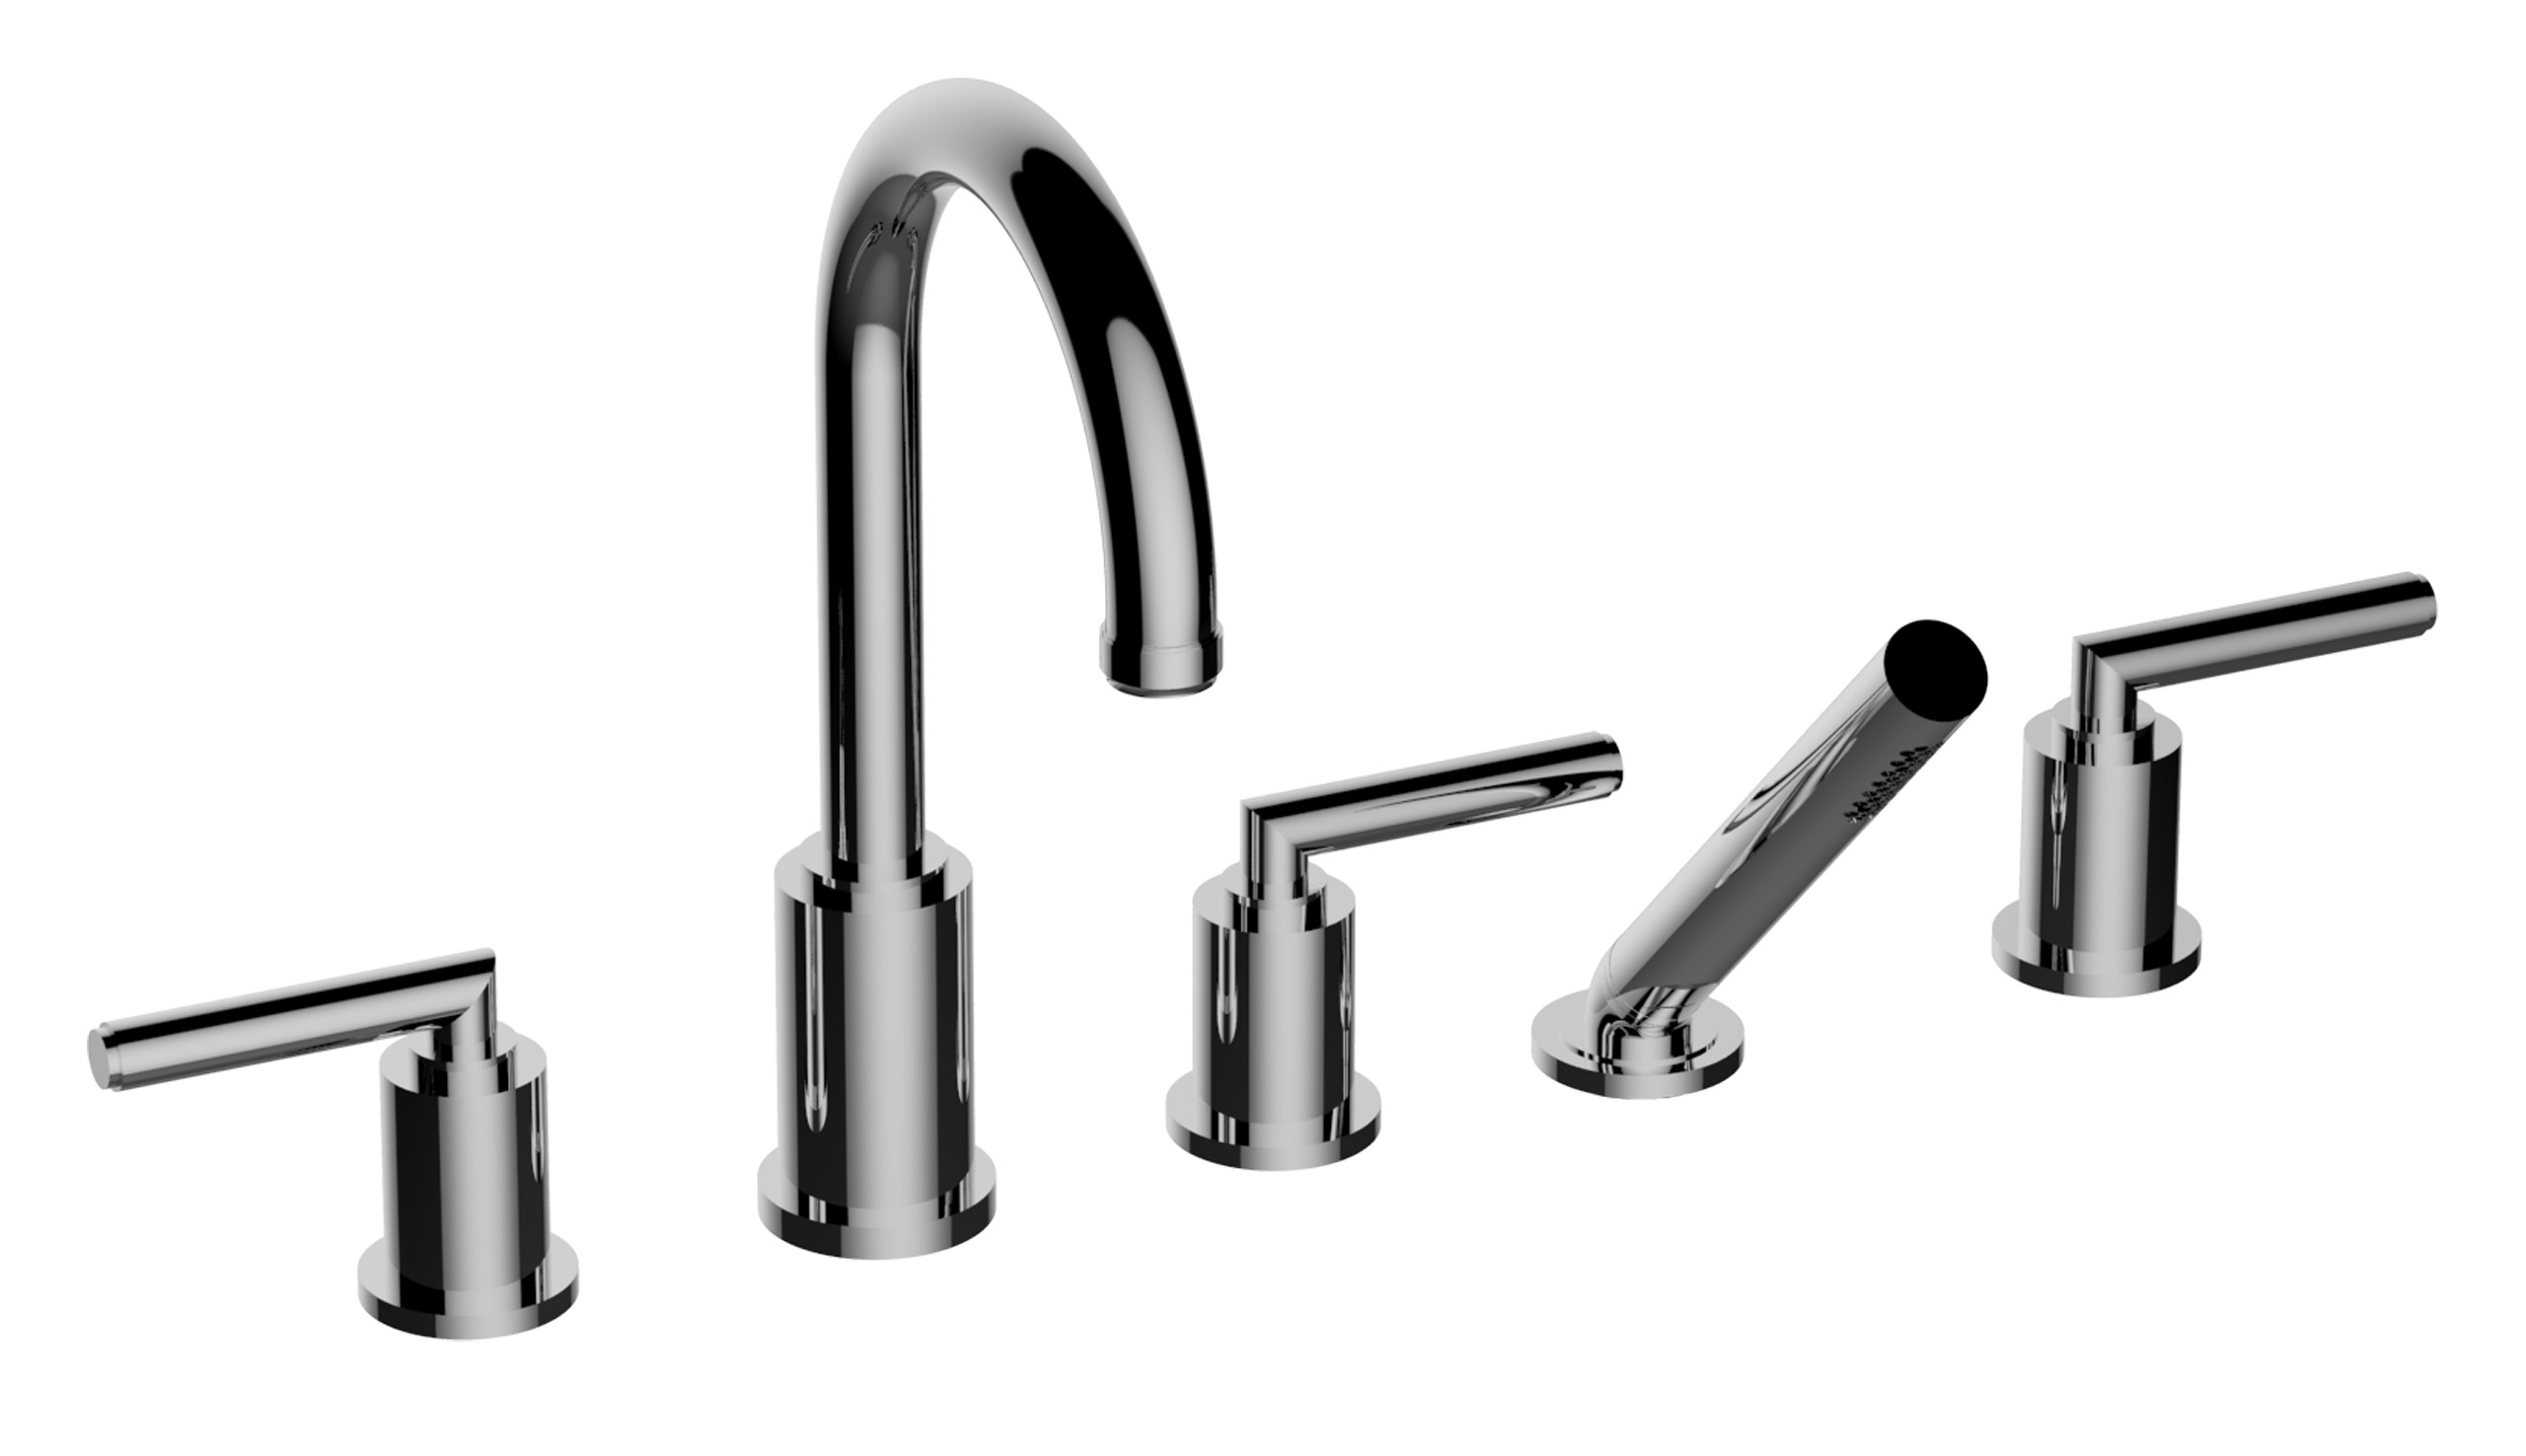 Santec 9455FO10 Roman Tub Filler with Fo Handles & Single Function Hand Shower - Valves Included - Polished Chrome